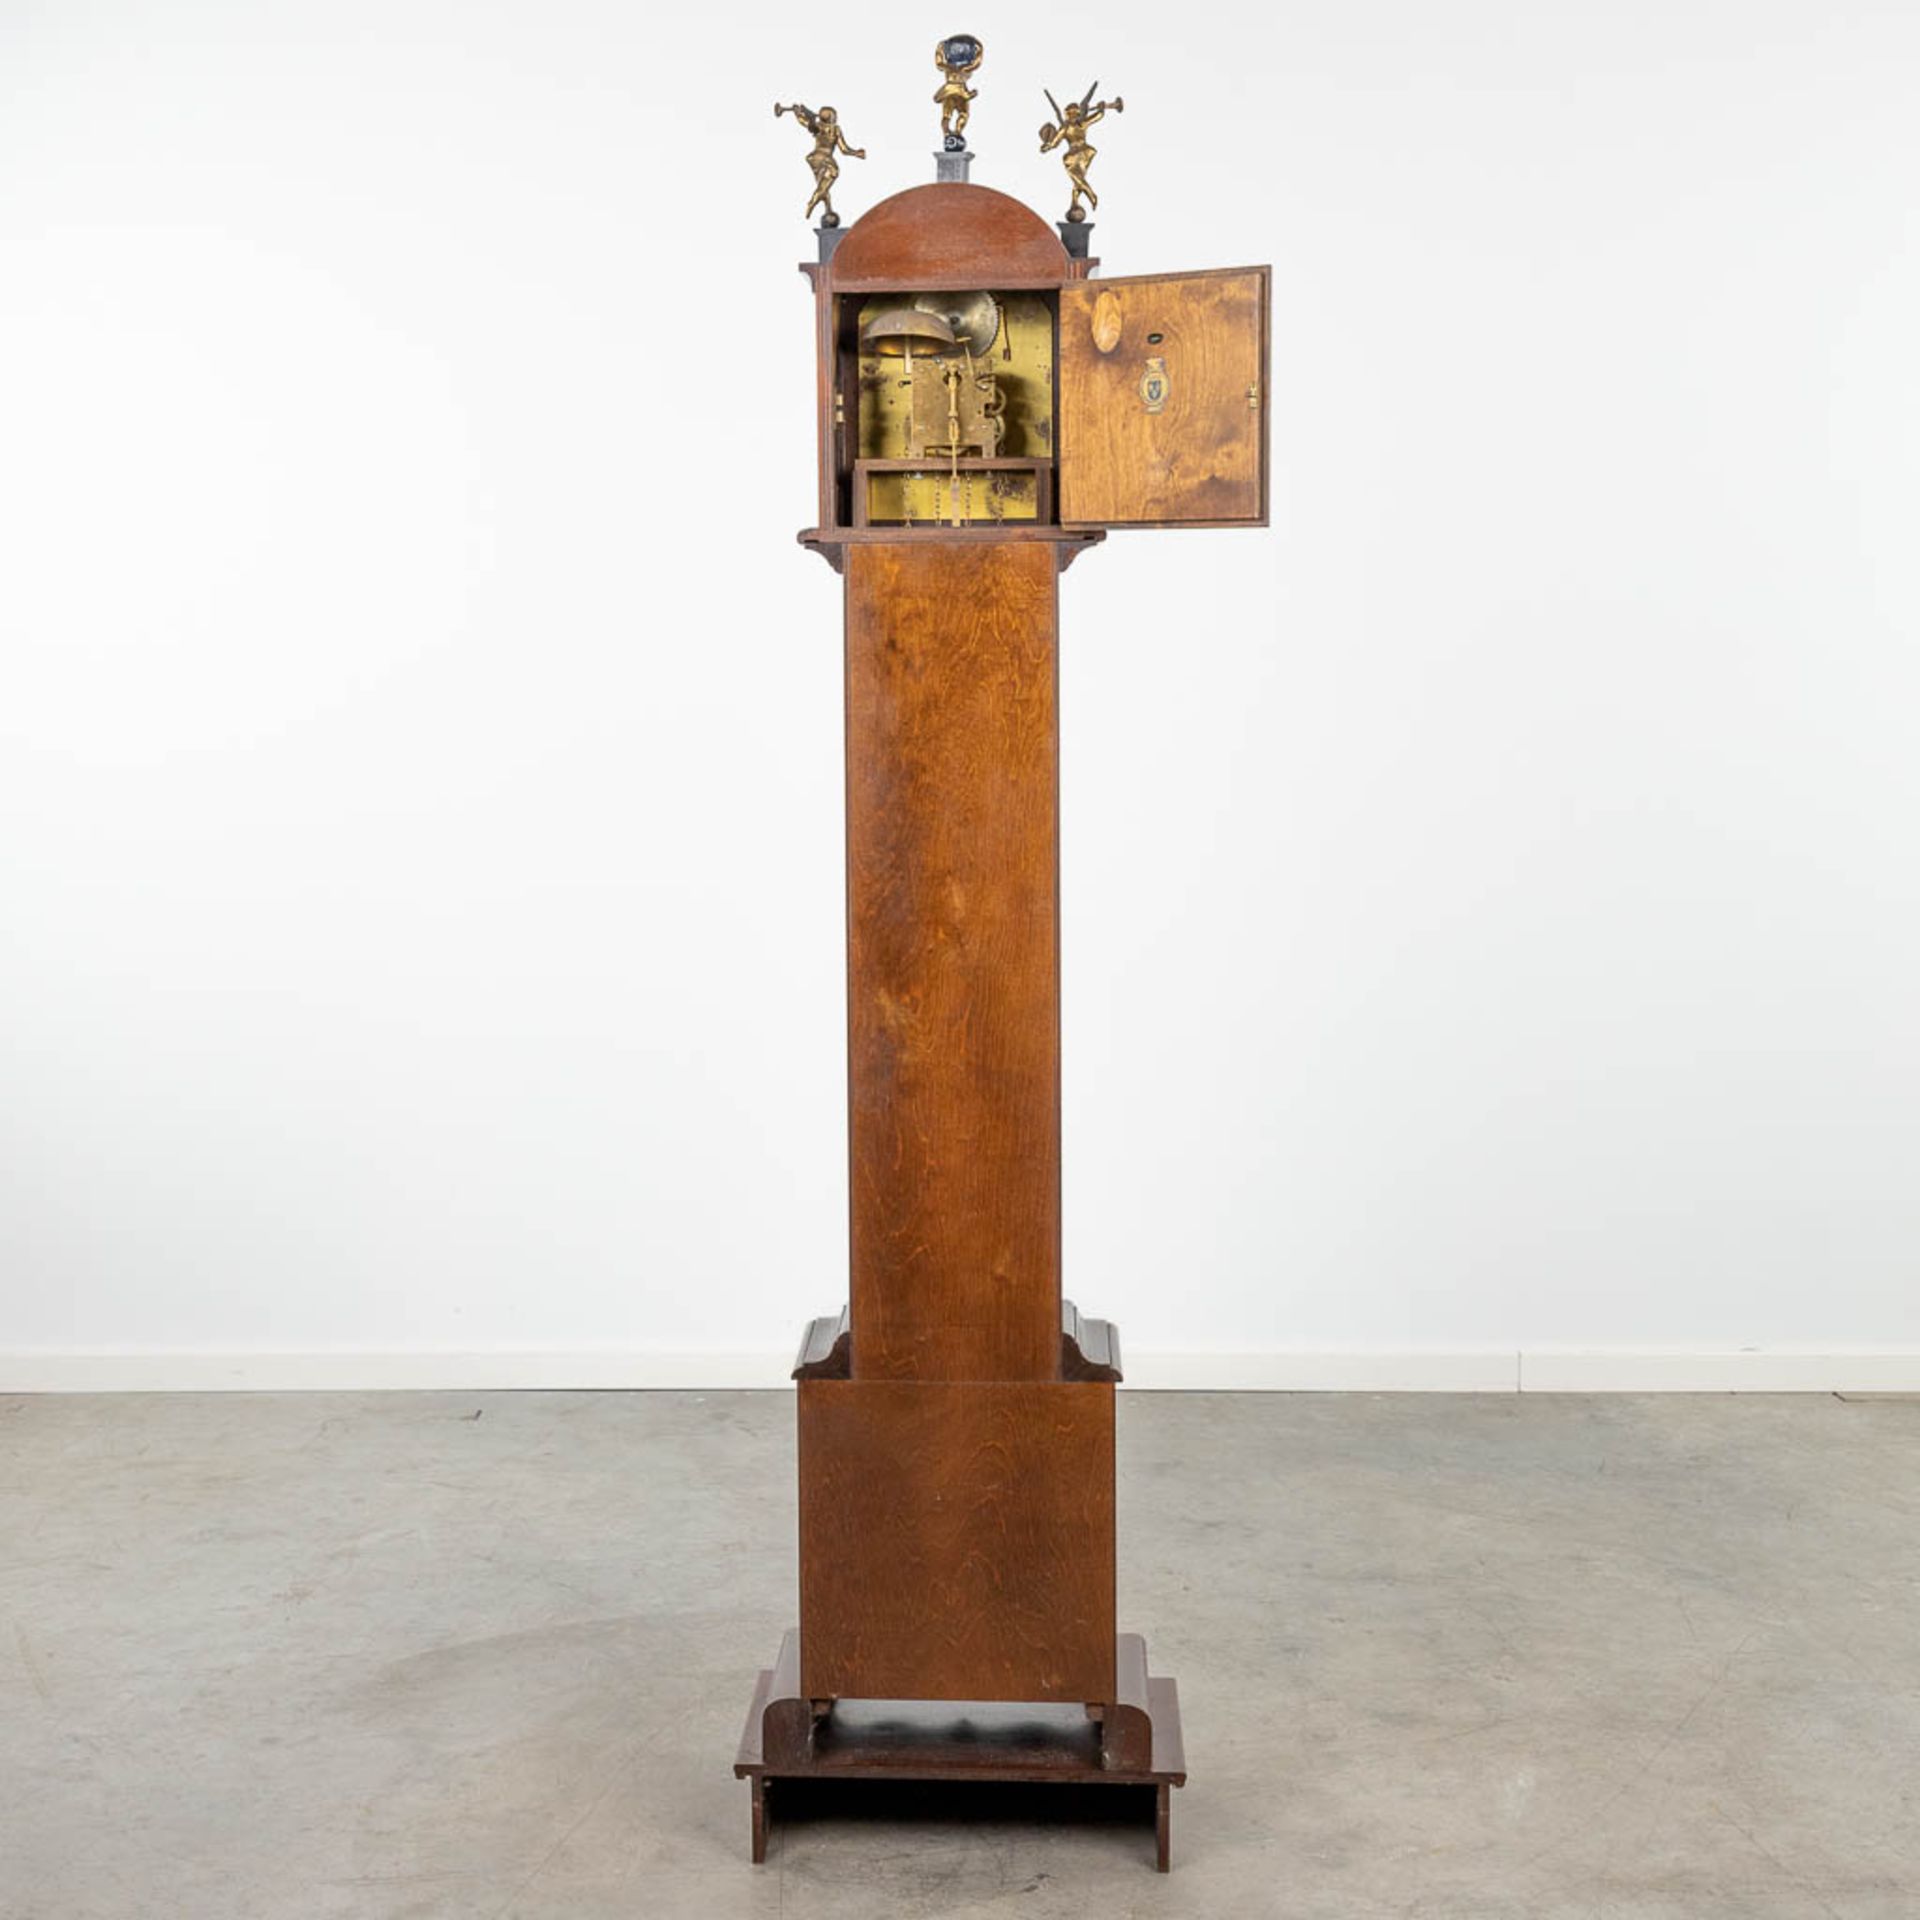 A standing clock, marked J.M. Verbrugge, Amsterdam. (28 x 47 x 192cm) - Image 6 of 12